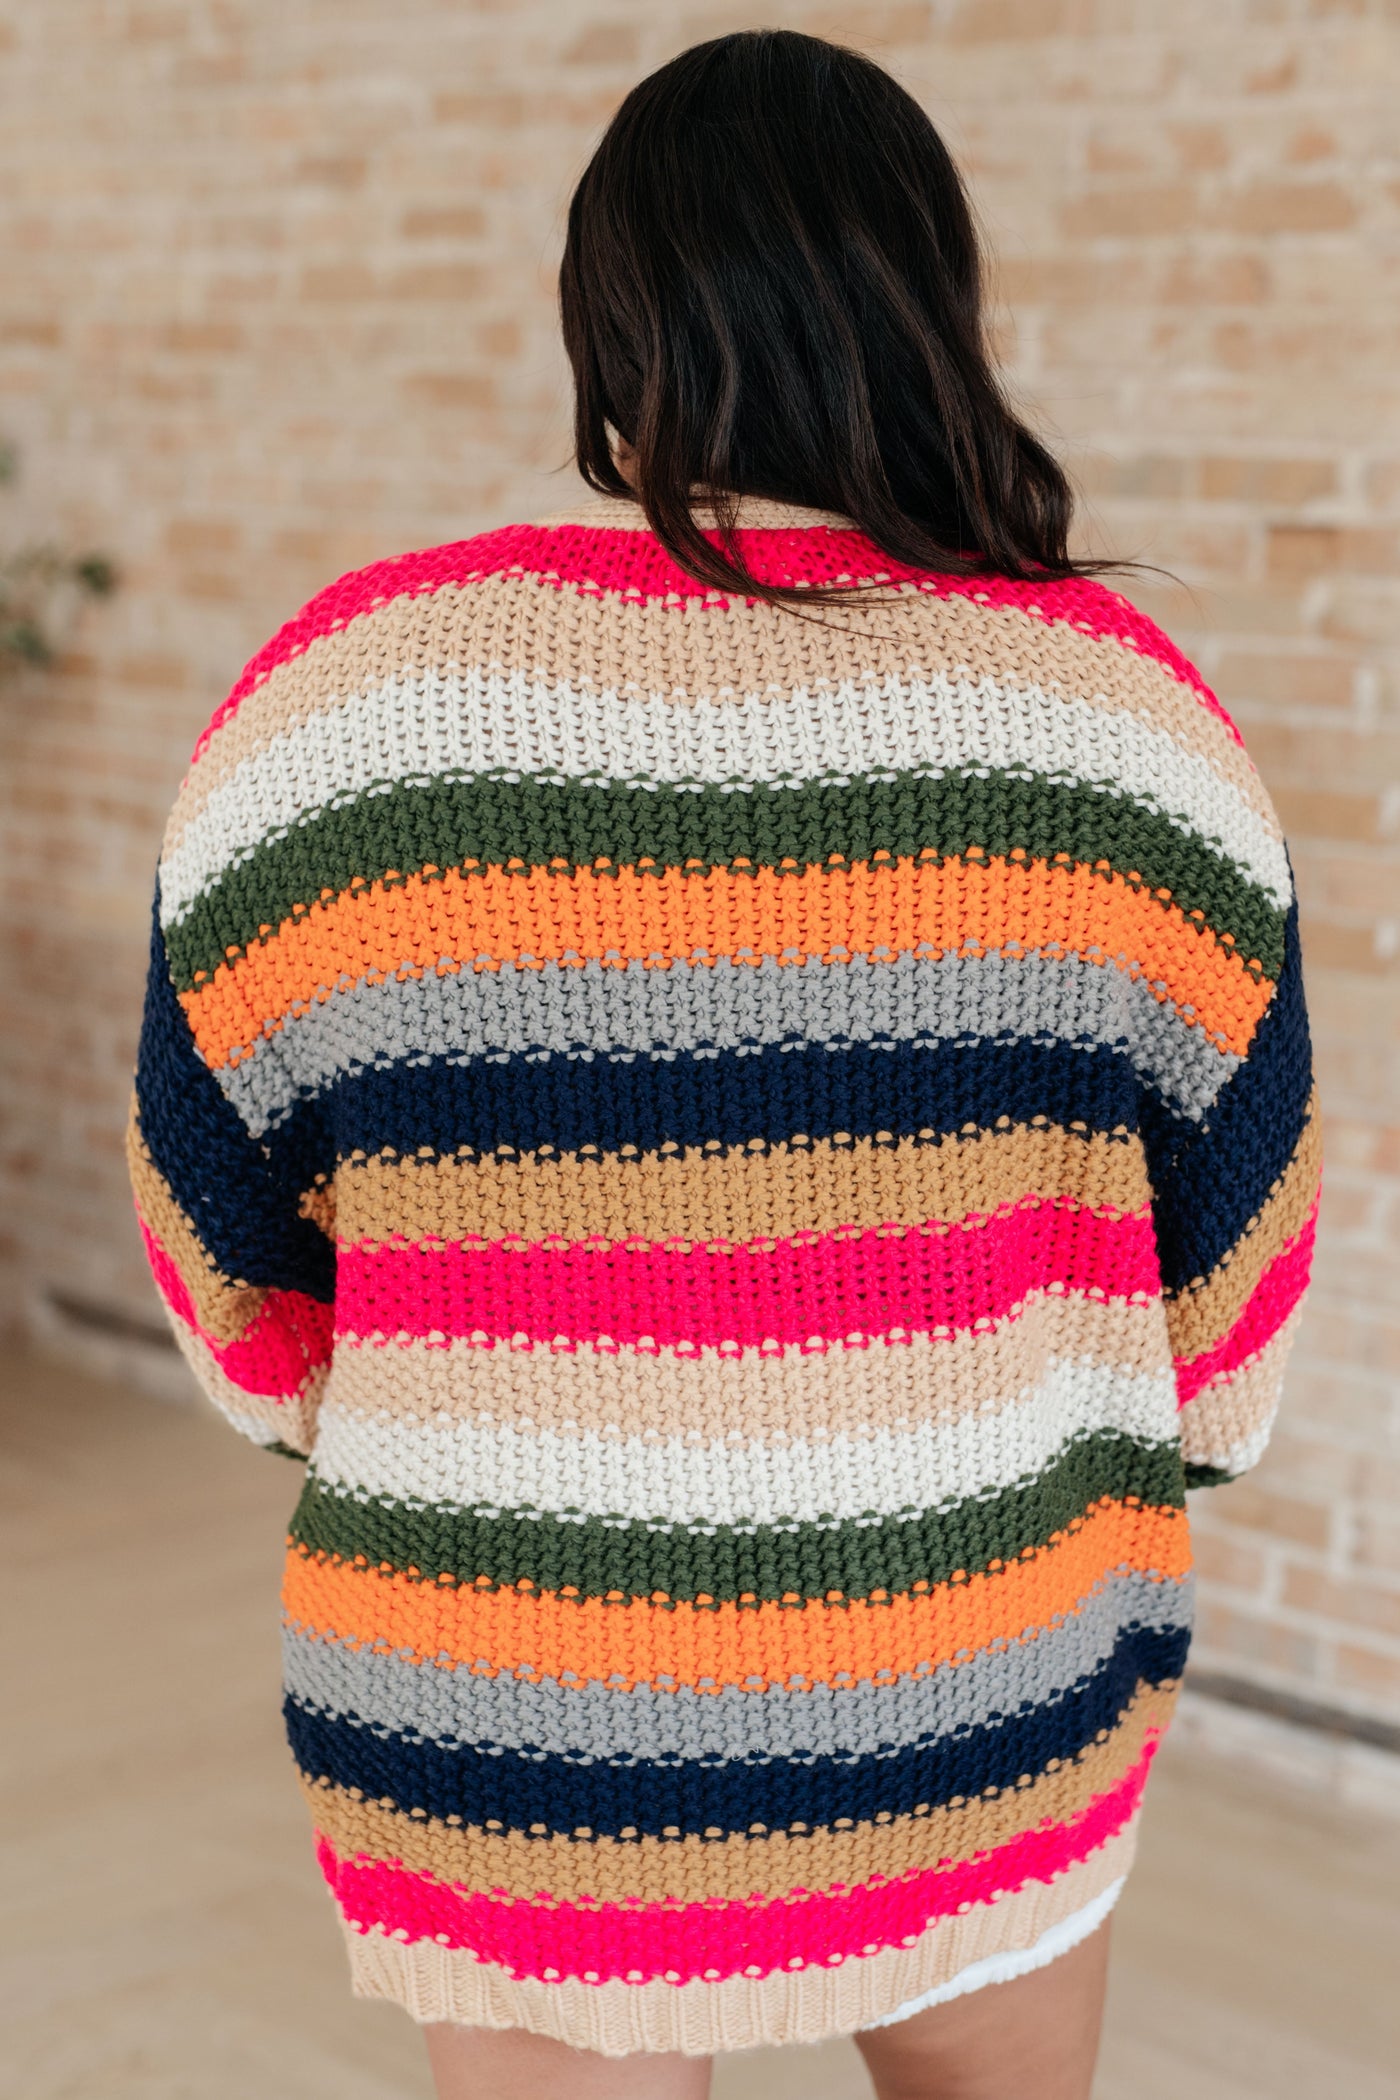 Life in Technicolor Knit Cardigan Tops Southern Soul Collectives